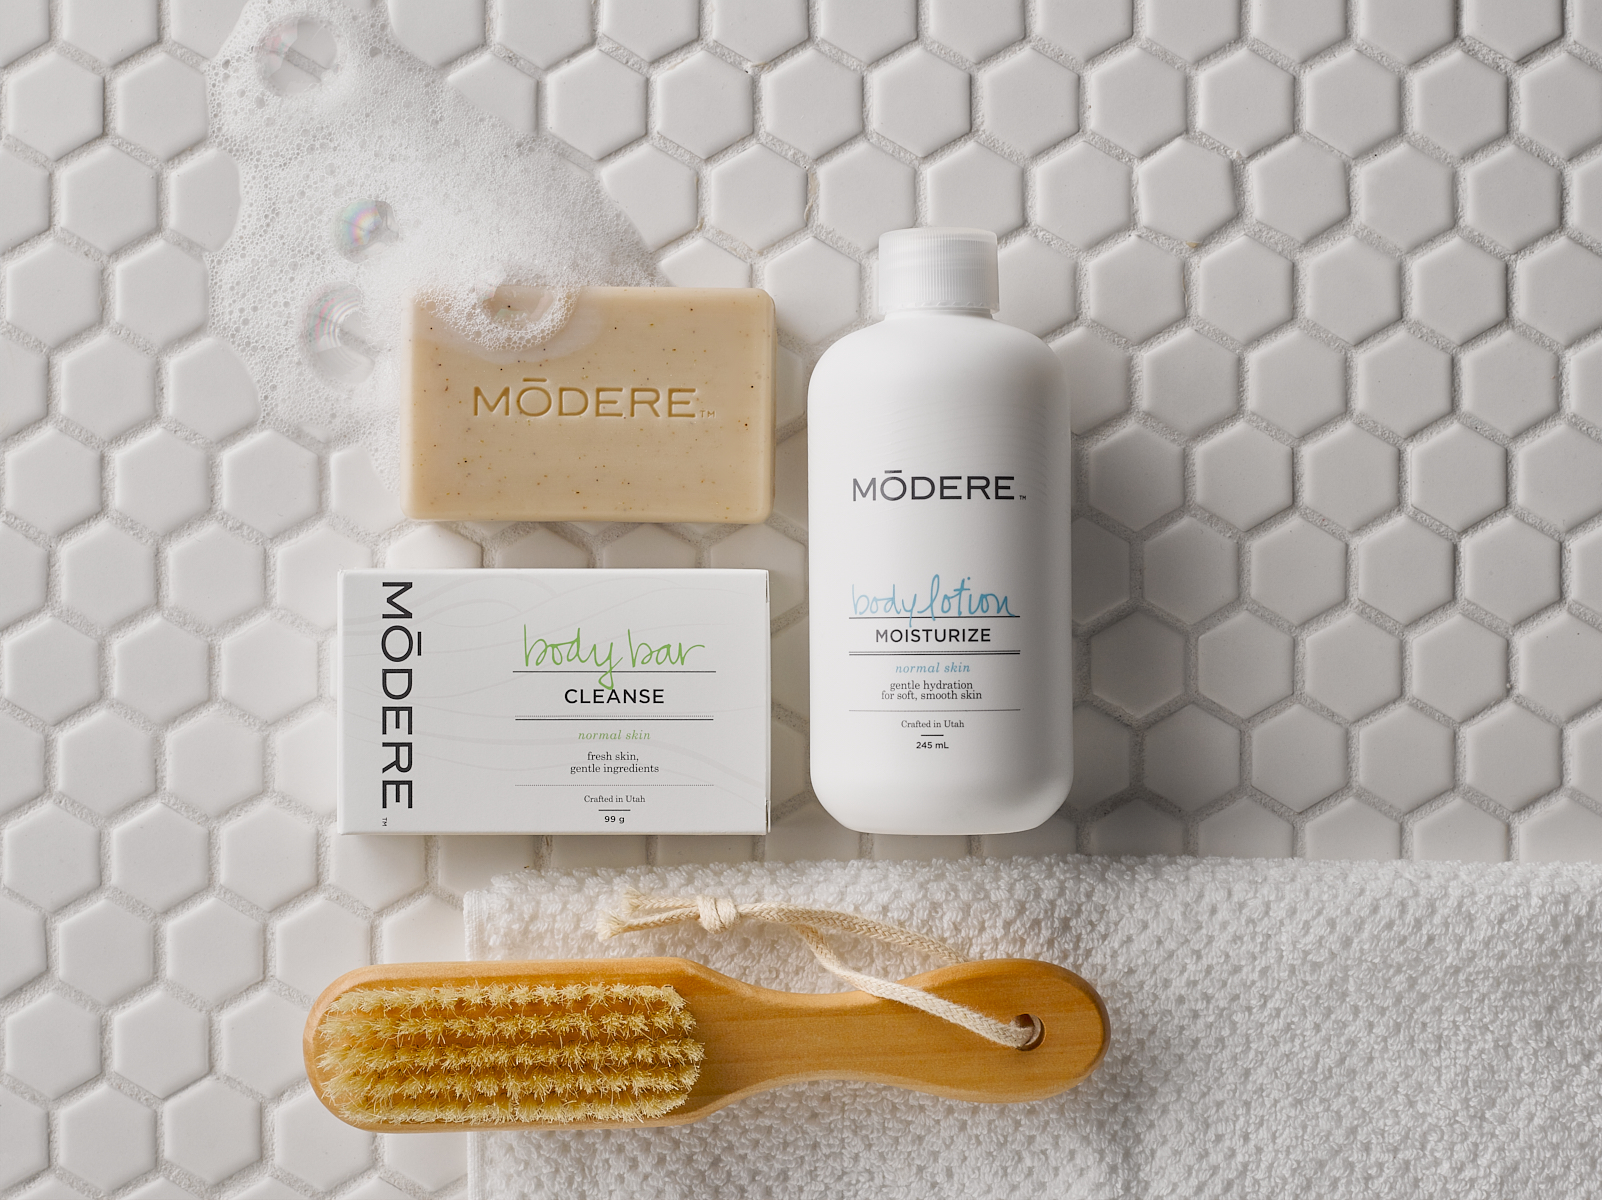 Modere bathroom products